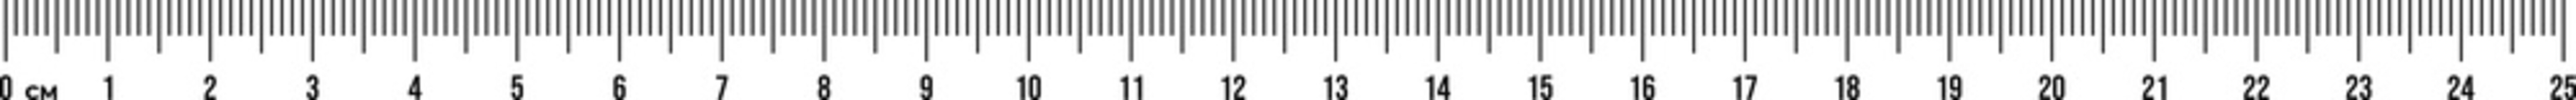 Ruler scale 25 cm. Centimeter scale for measuring